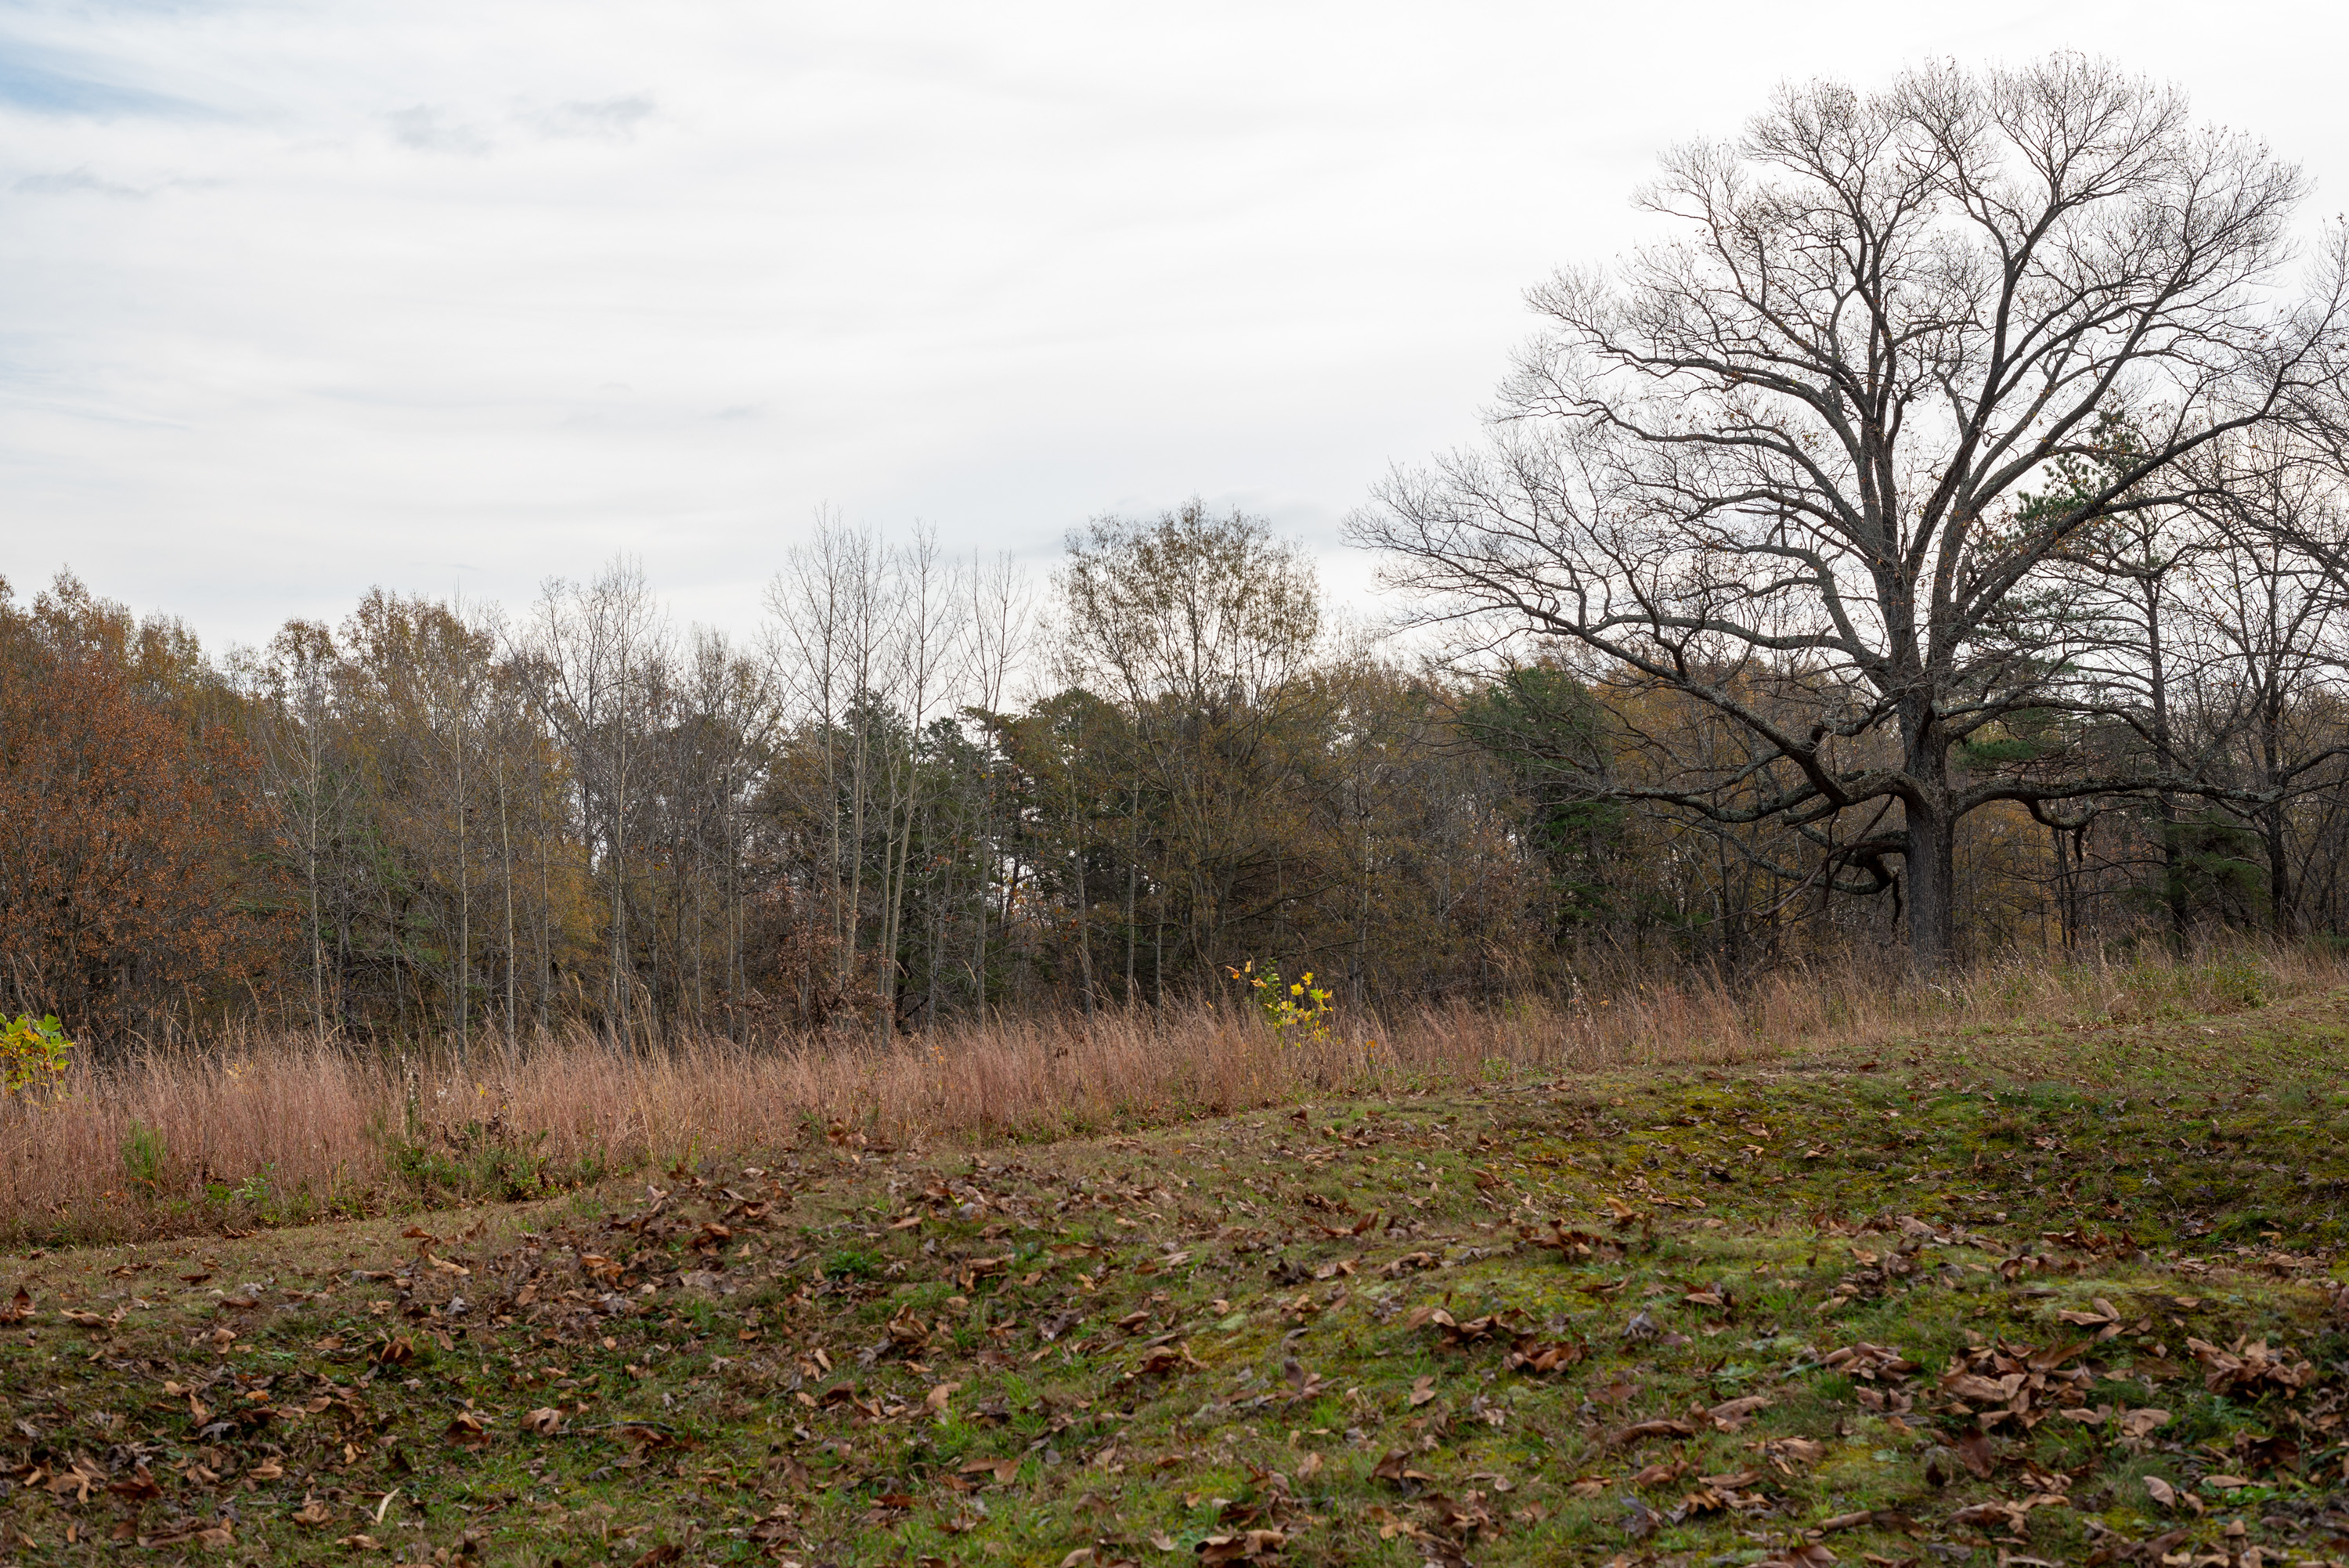 Earthworks in front of a clearing with bare winter forest in the background